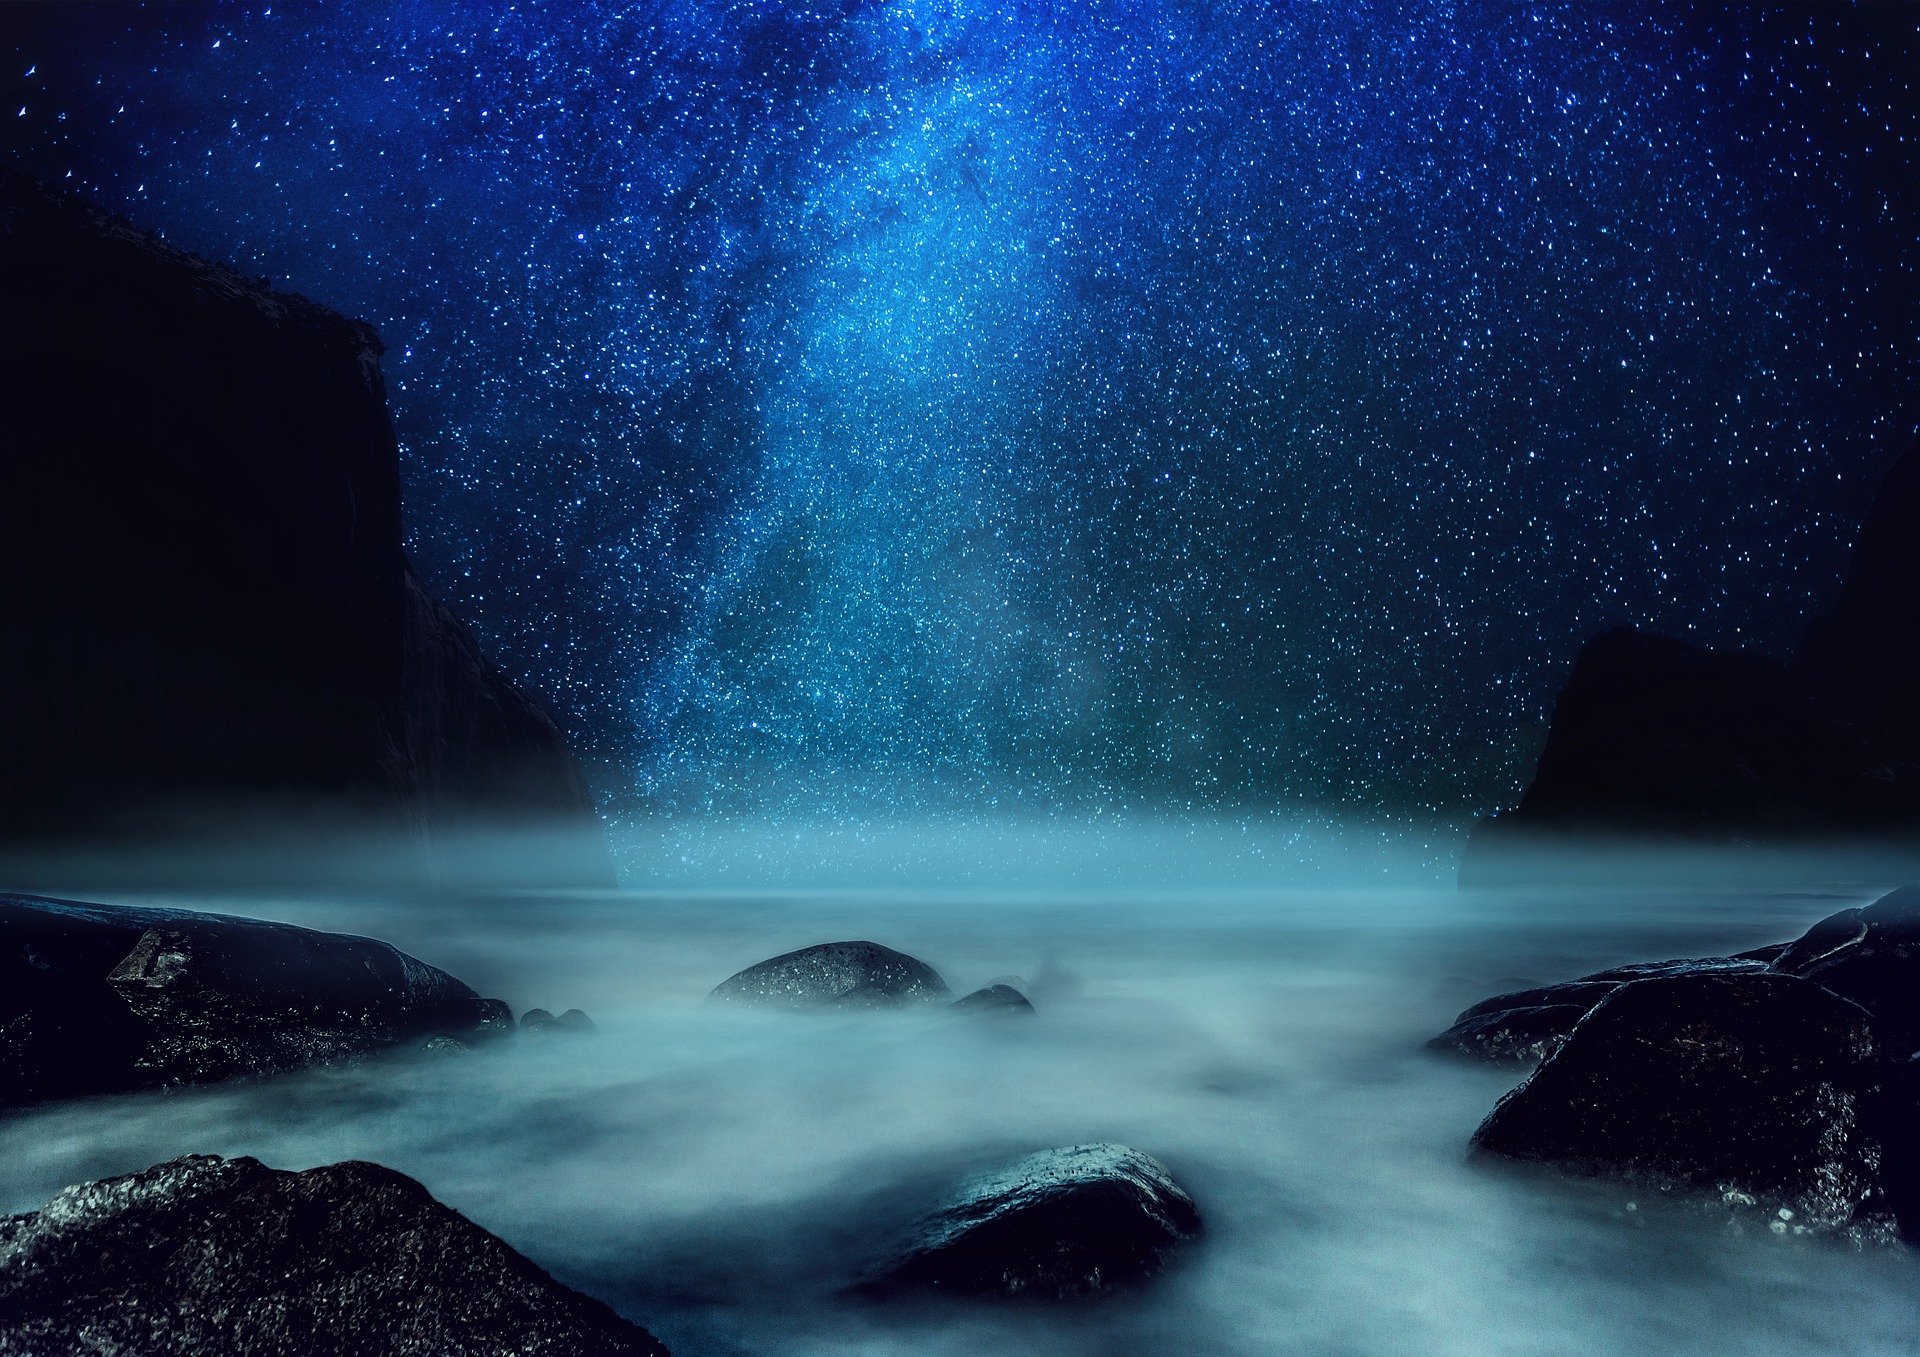 night sky with stars, water, mist and  rocks